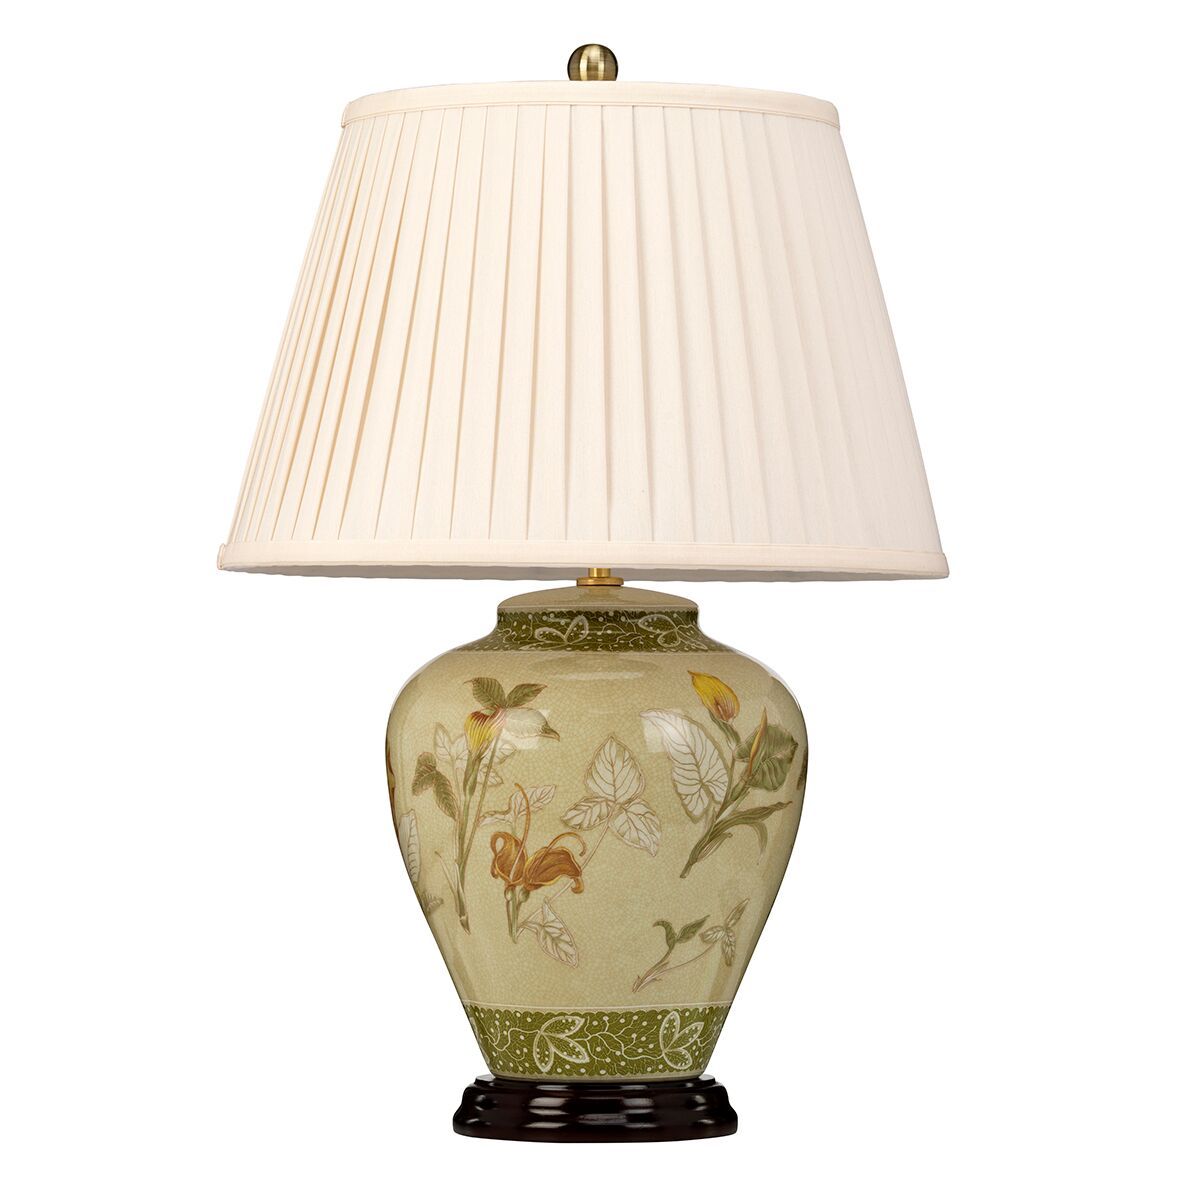 Archway Porcelain Green and Cream Table Lamp c/w shade - ID 8000